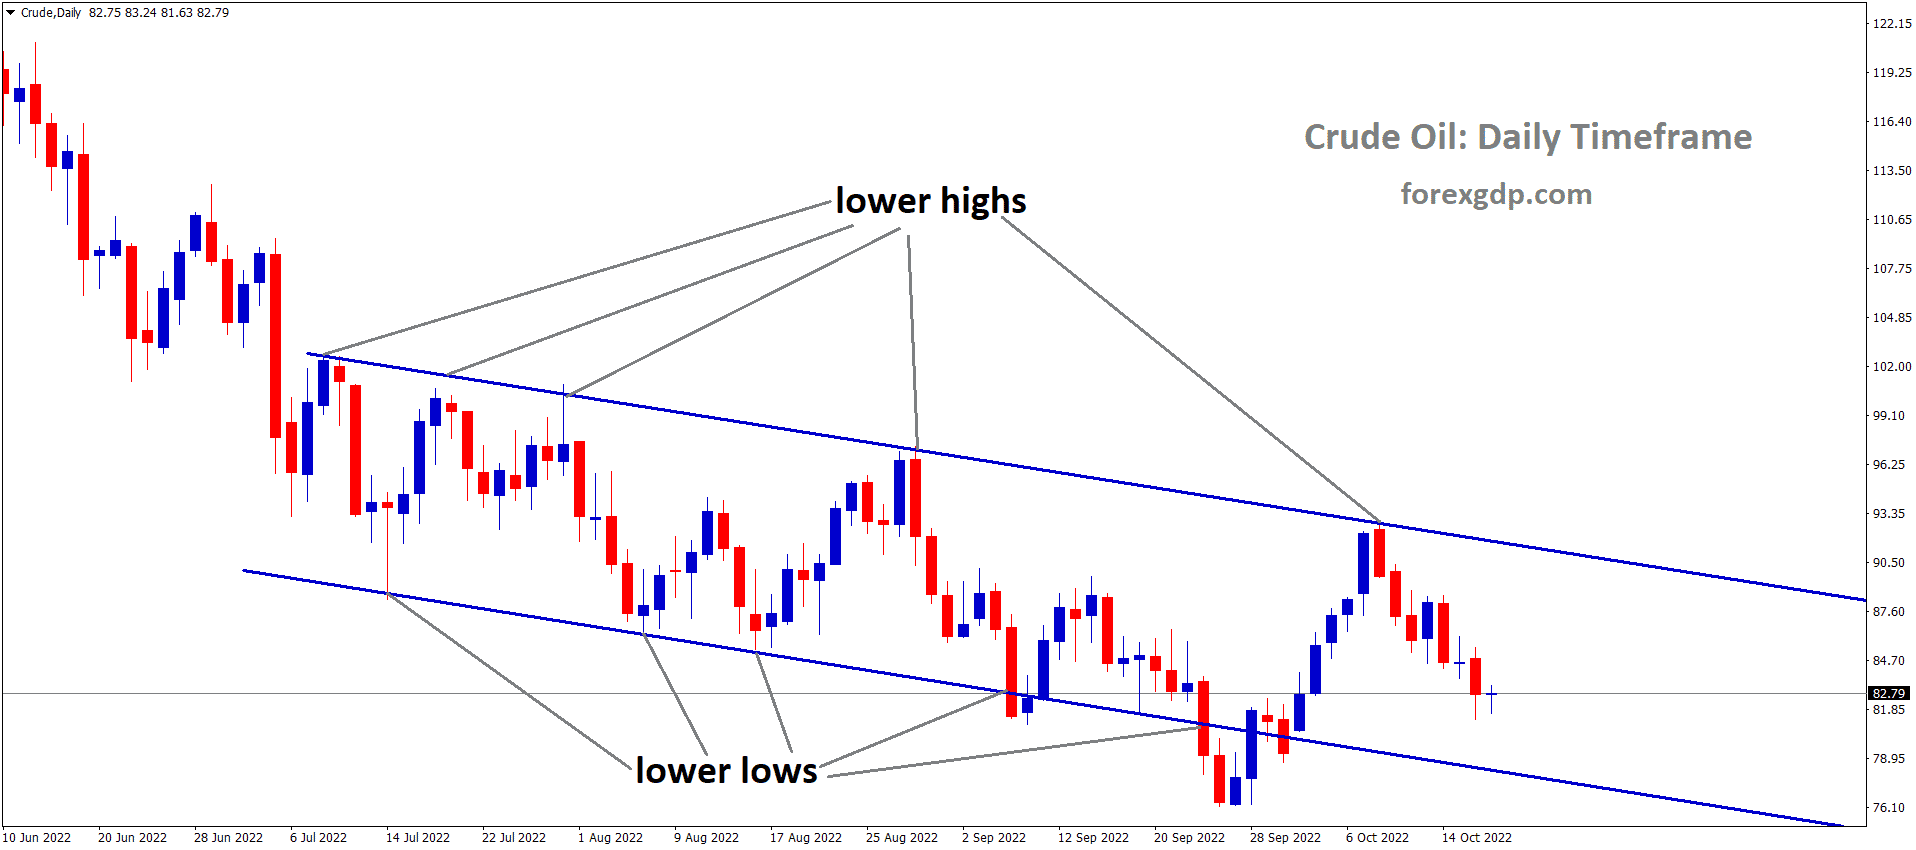 Crude Oil is moving in the descending channel and the market has fallen from the lower high area of the channel 1